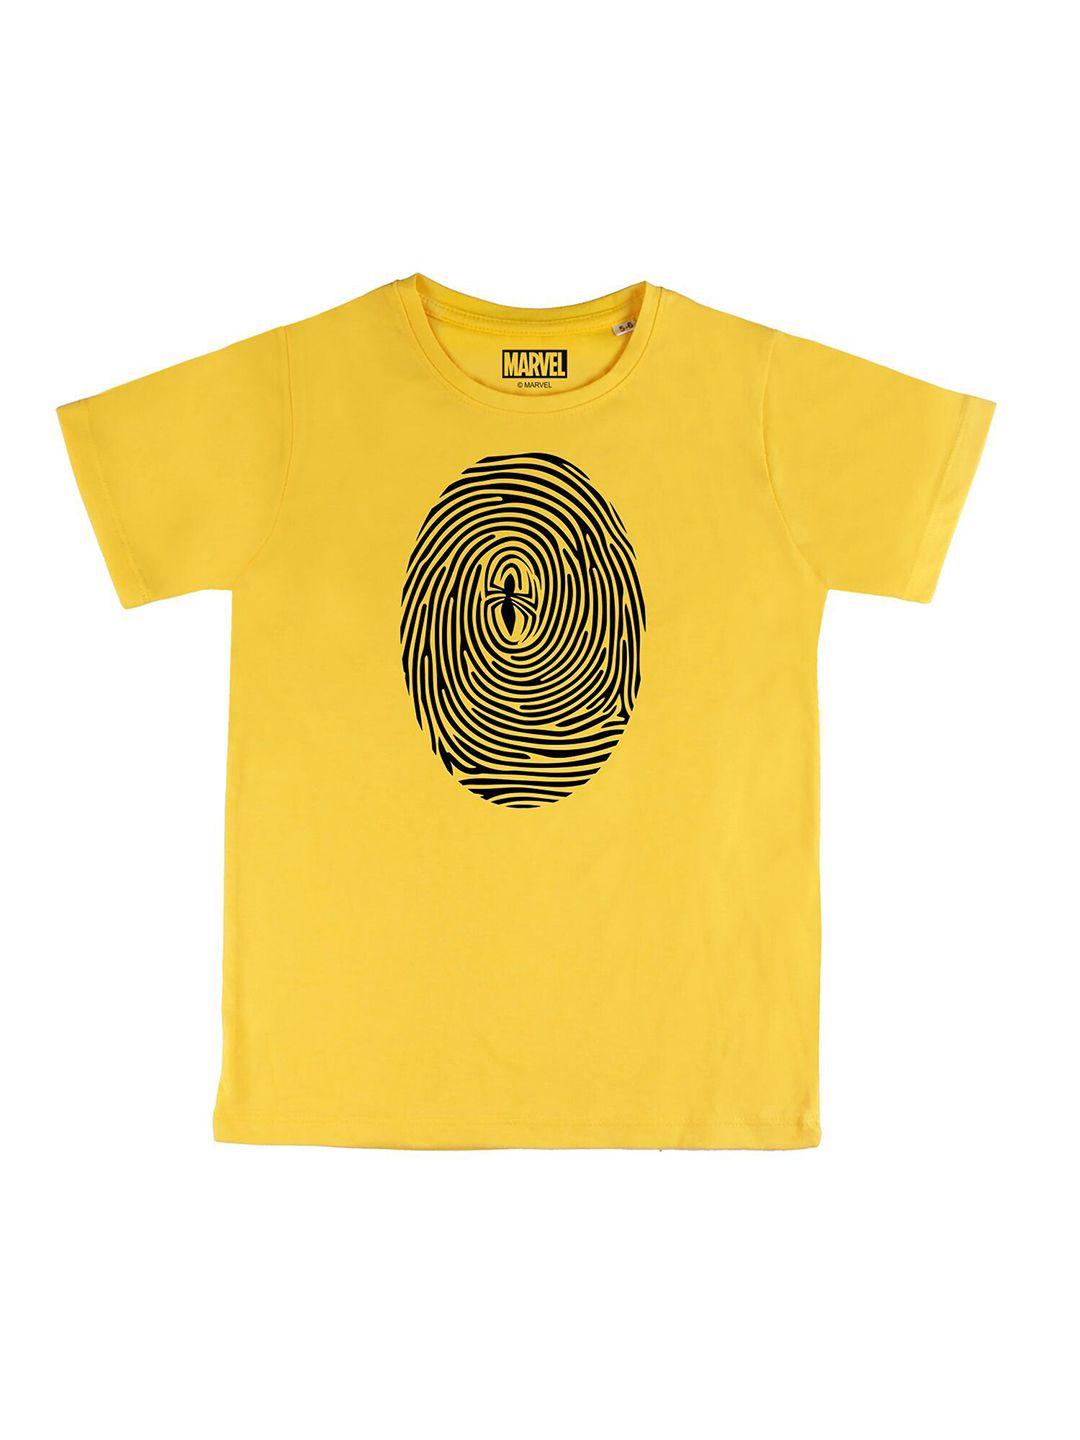 marvel by wear your mind boys yellow printed t-shirt